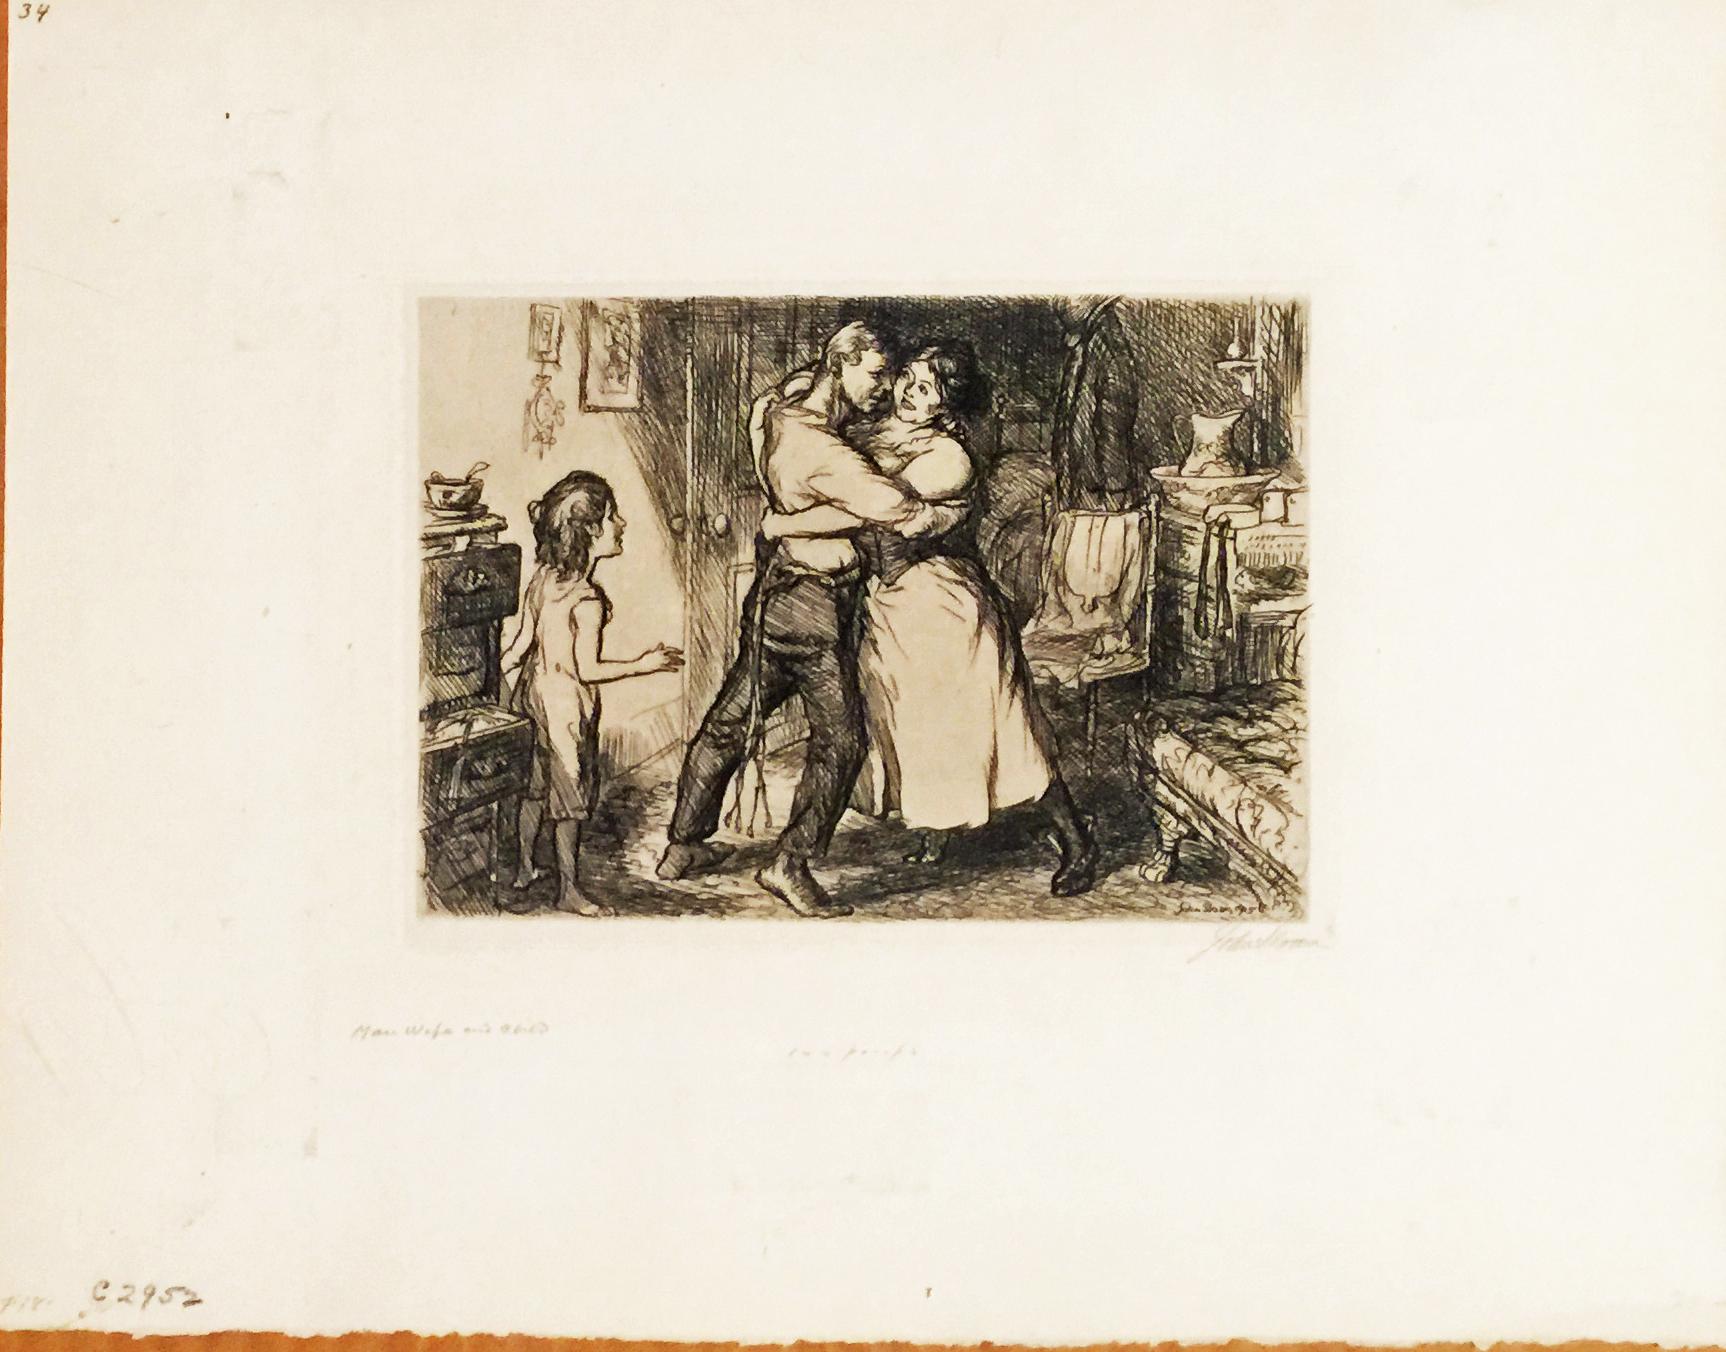 MAN, WIFE, AND CHILD - Print by John Sloan